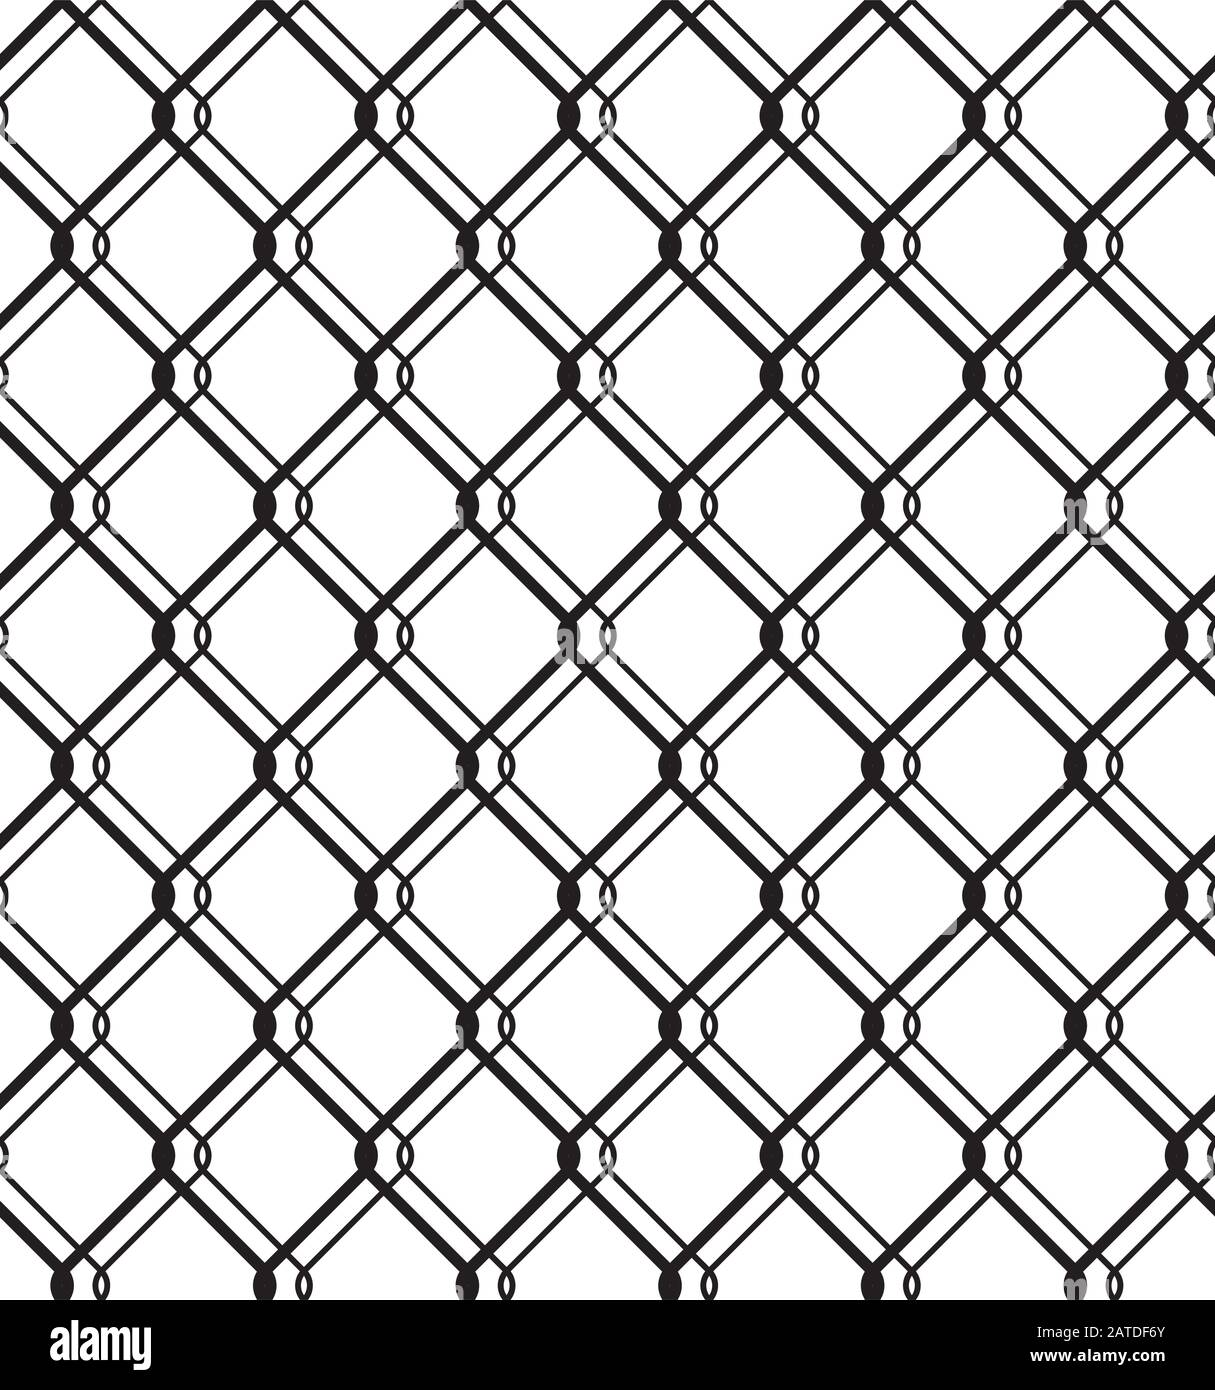 Wired metallic fence seamless texture. Steel wire mesh isolated on